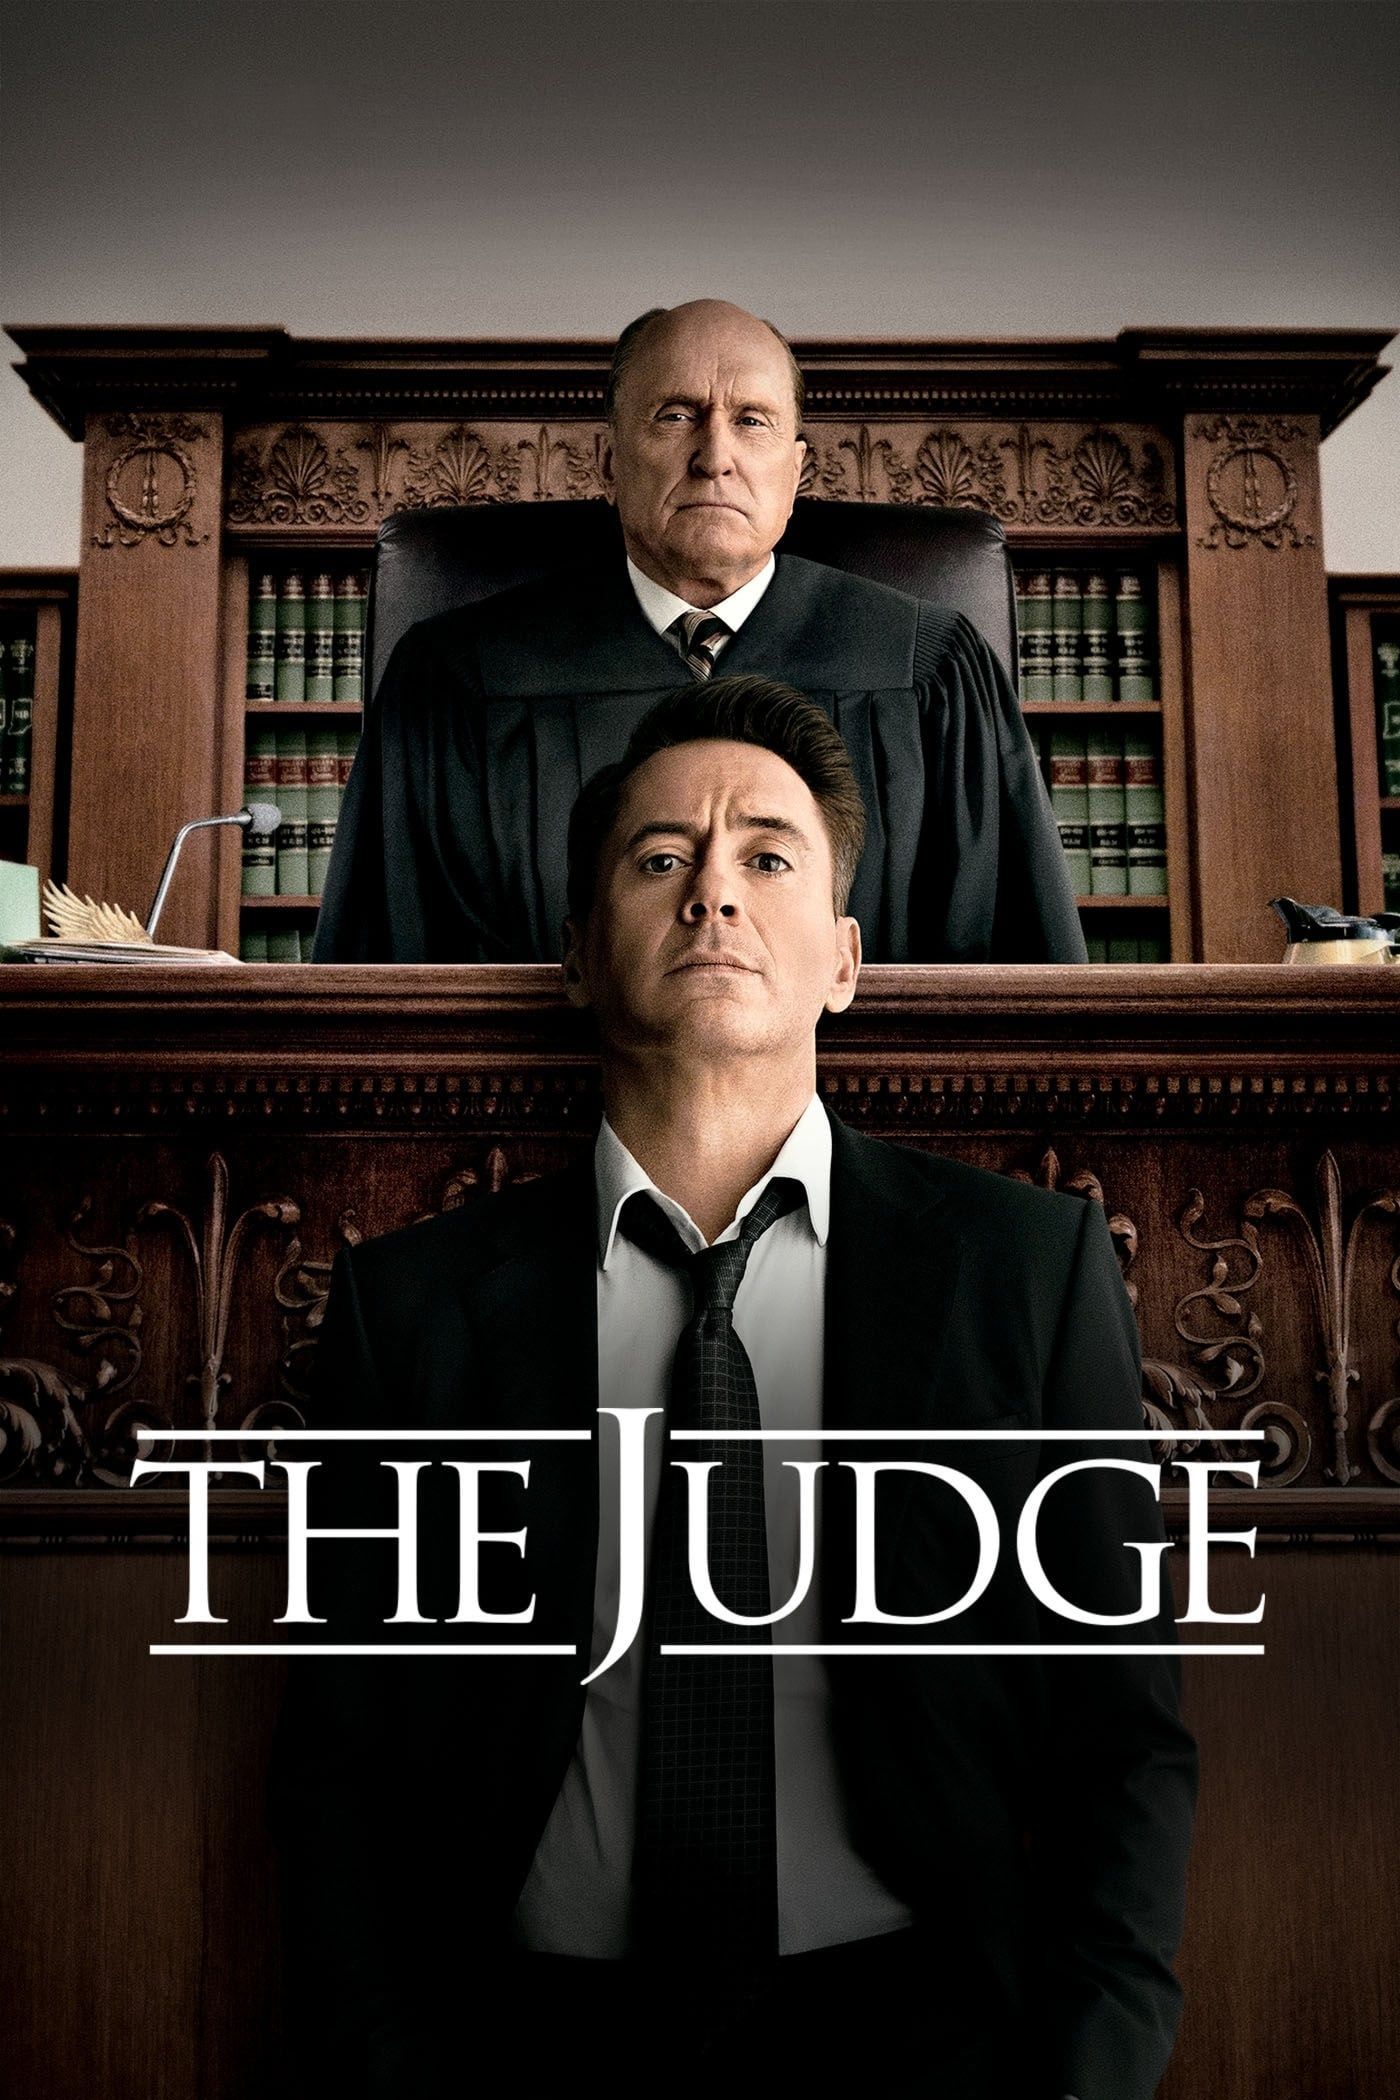 This Is Why Robert Downey Jr. Said No To Having Jack Nicholson As His Father In 'The Judge'